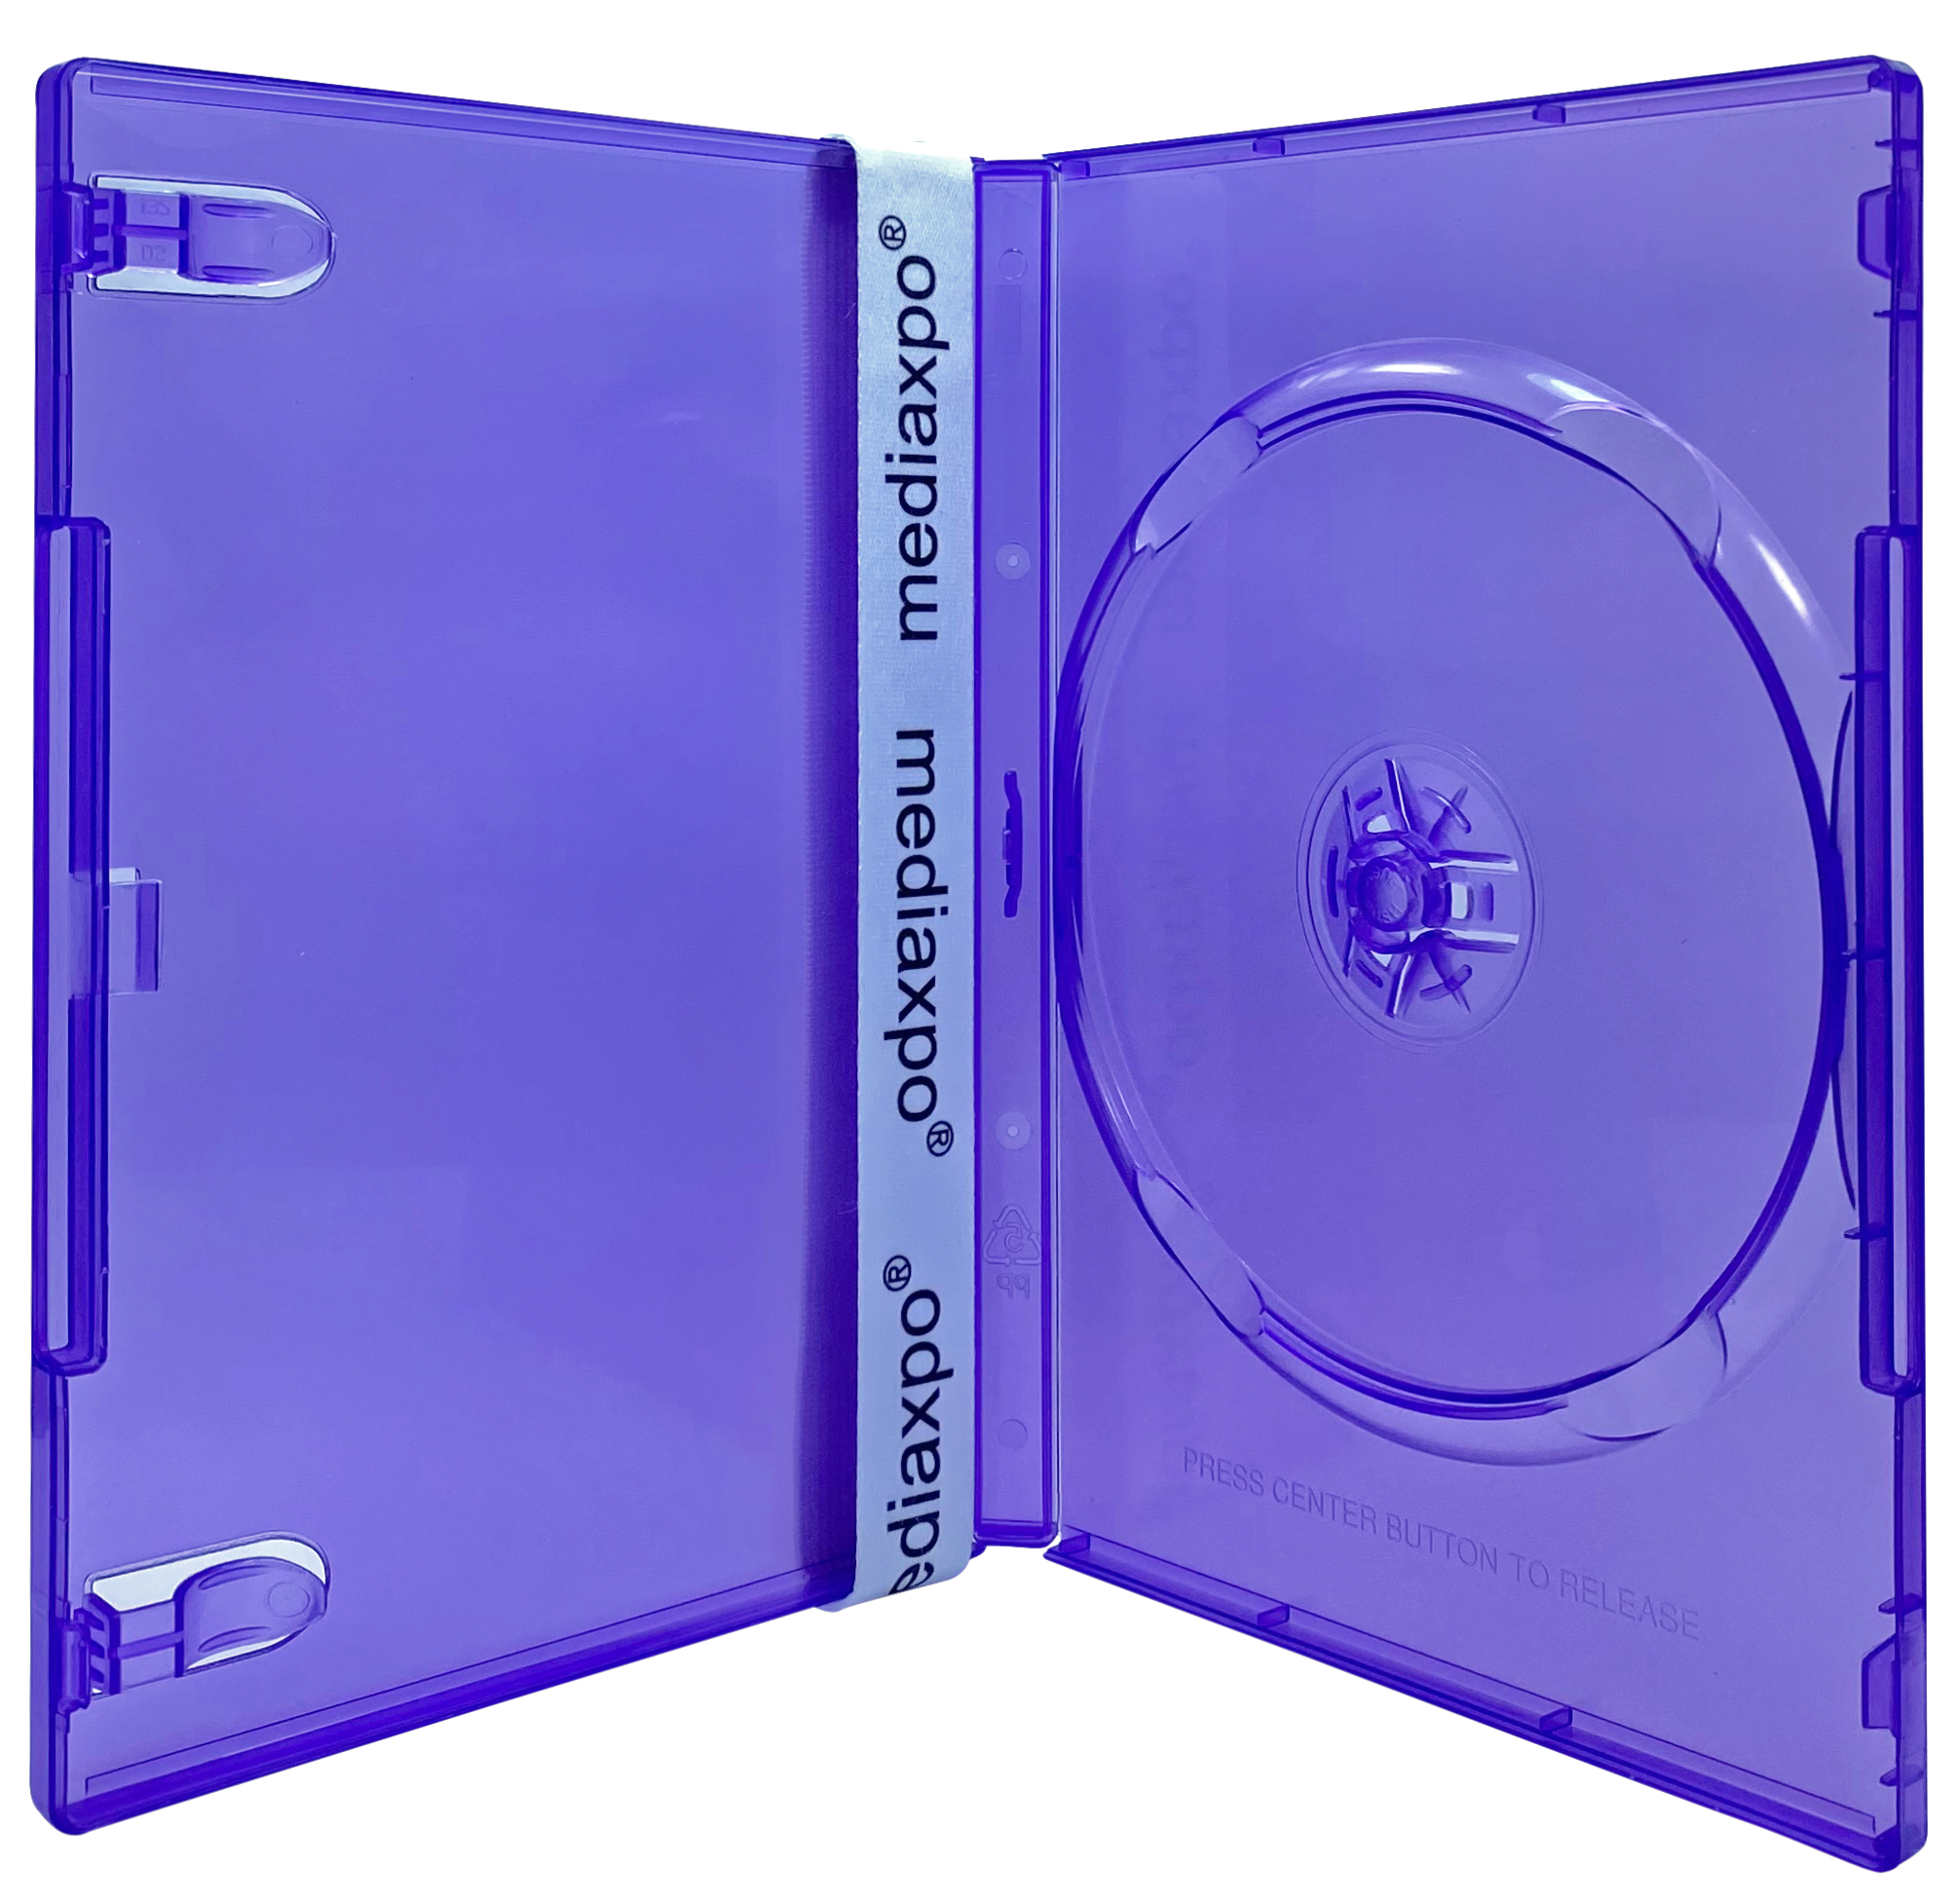 Image of ID 1214260127 100 STANDARD Clear Purple Color Single DVD Cases